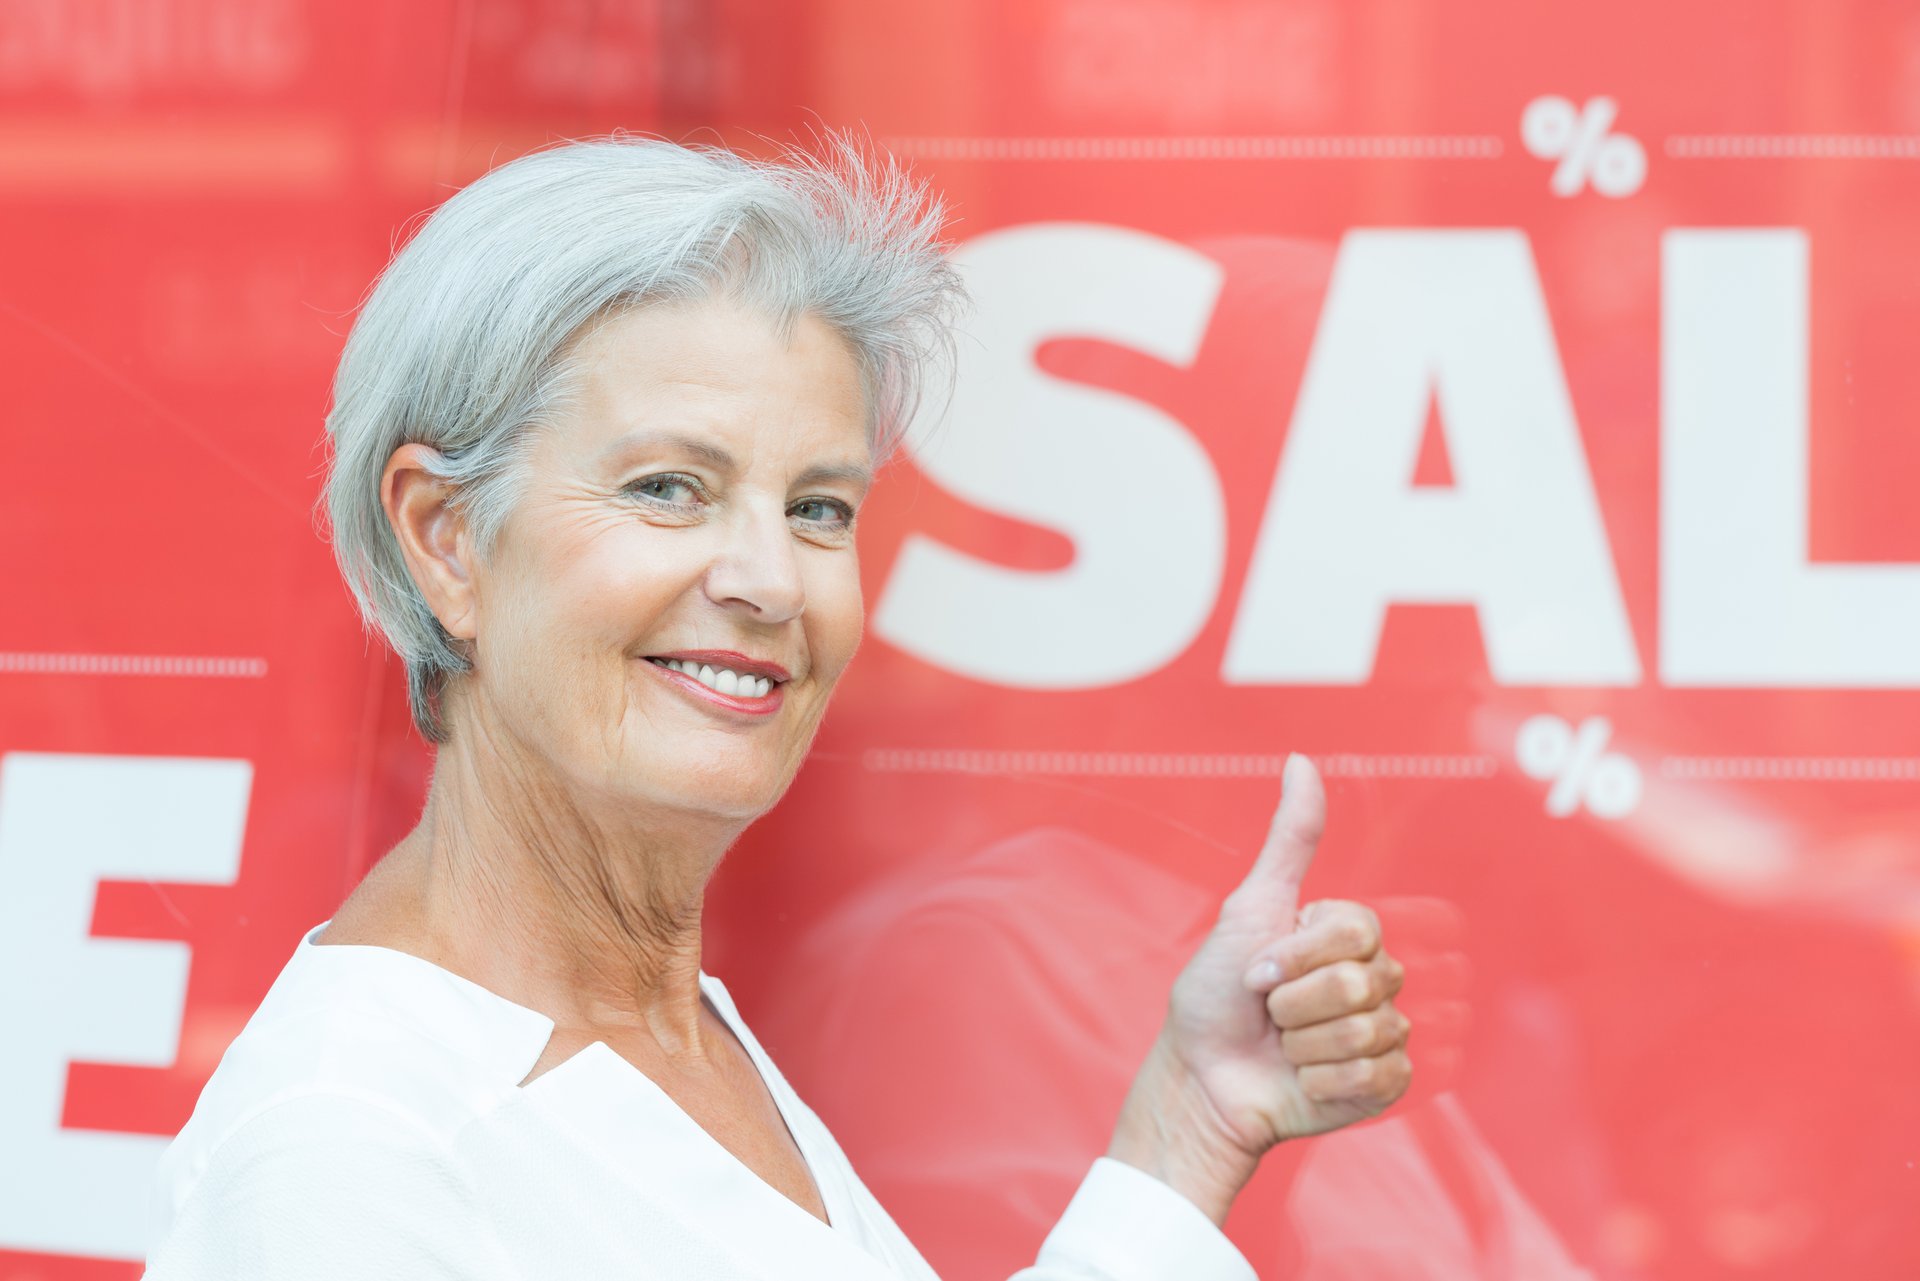 A senior woman gives a thumbs-up in front of a sale sign